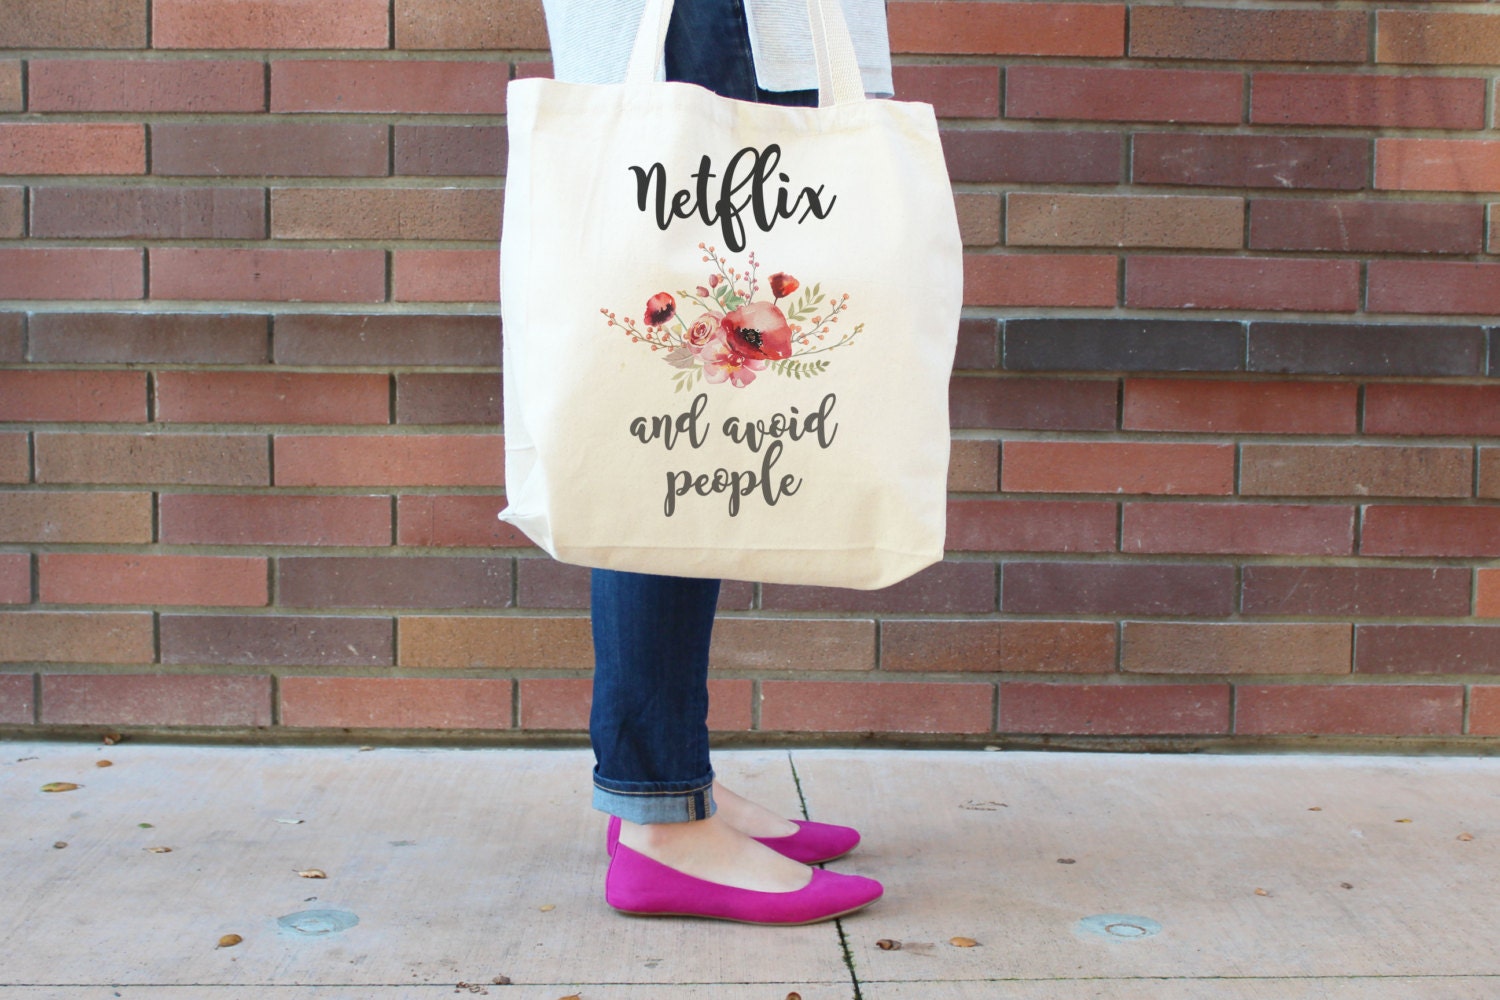 Farmers market tote, funny tote bag, market bag, netflix and avoid people, unique tote, hipster gift, printed tote bag, back to school